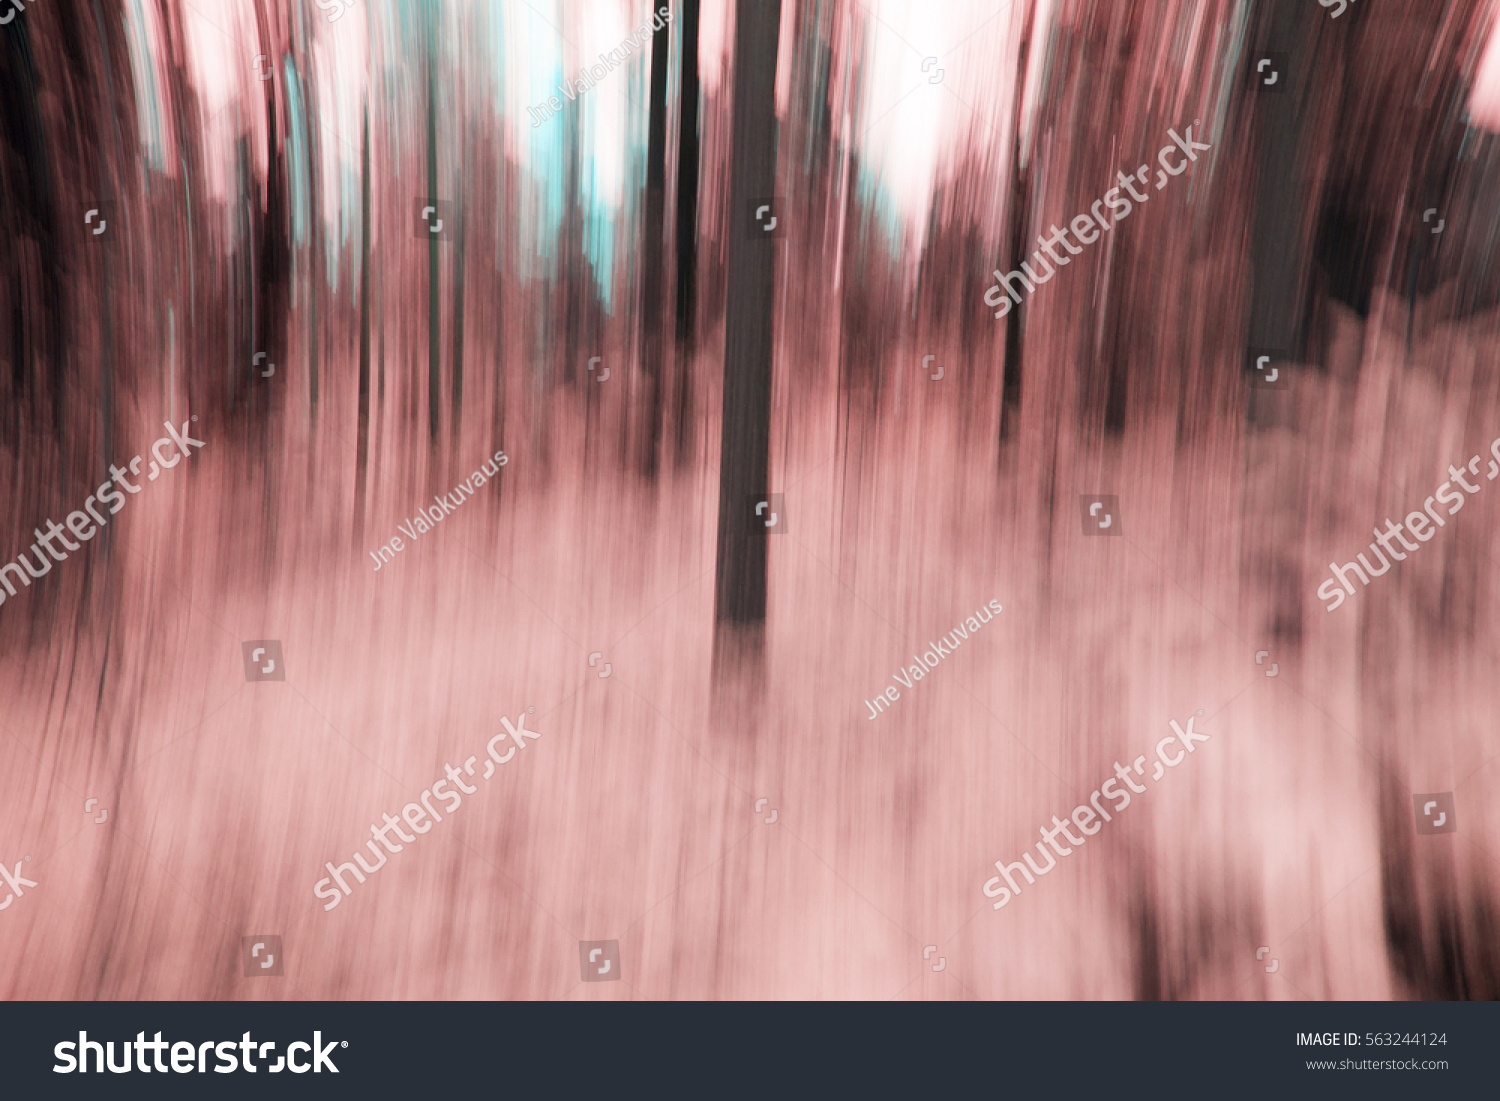 Forest scenery with blur effect. The blur effect is made by moving the camera vertically. Fantasy colored forest. #563244124